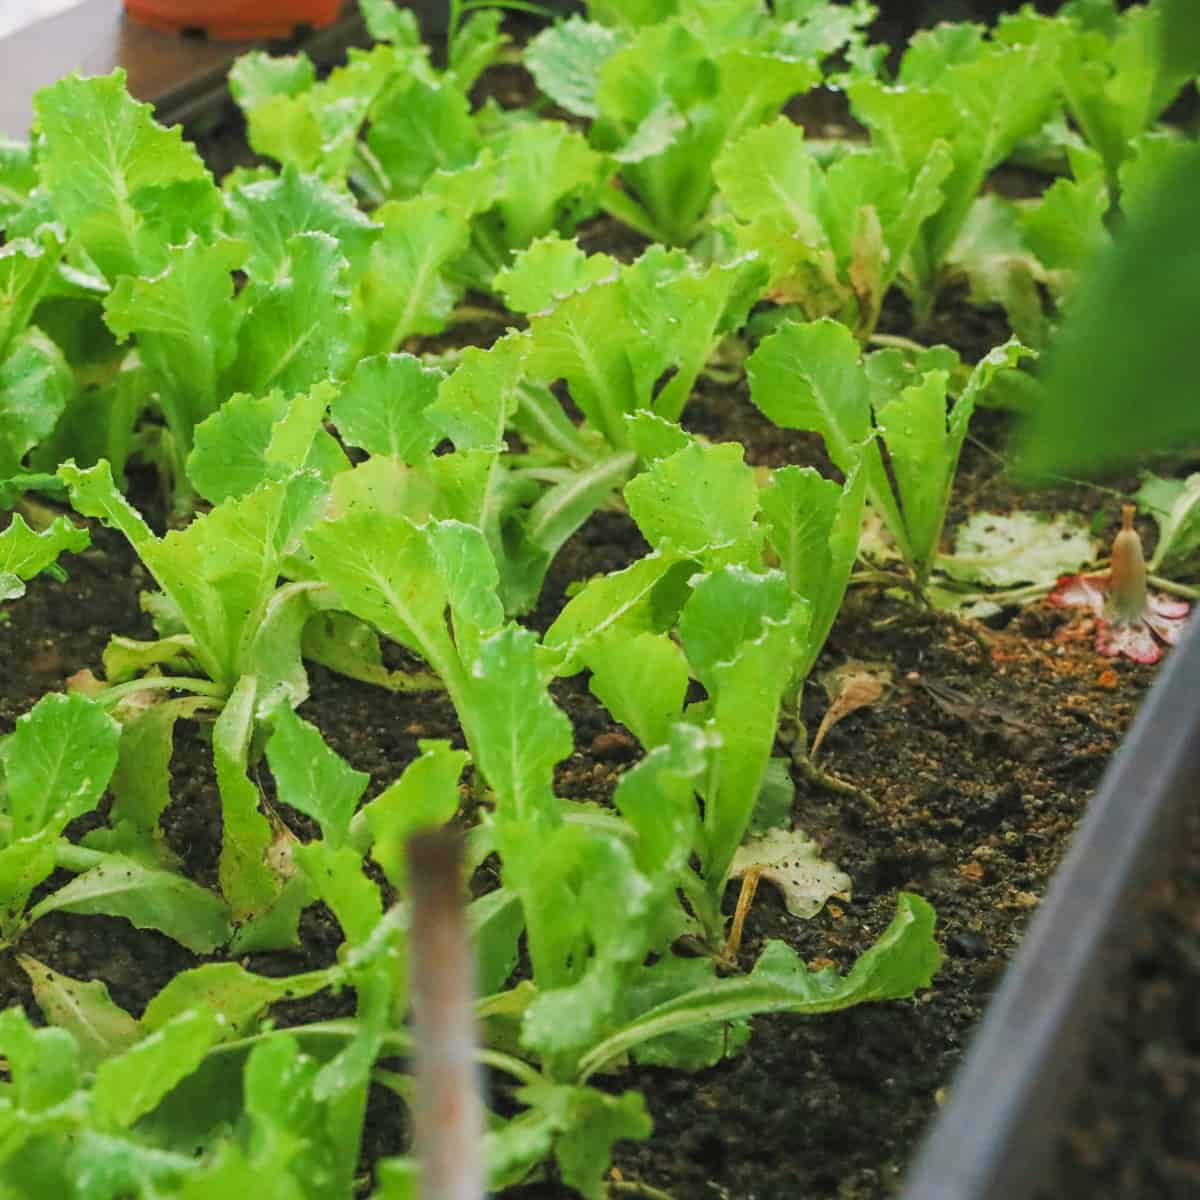 Lettuce plants growing in a container